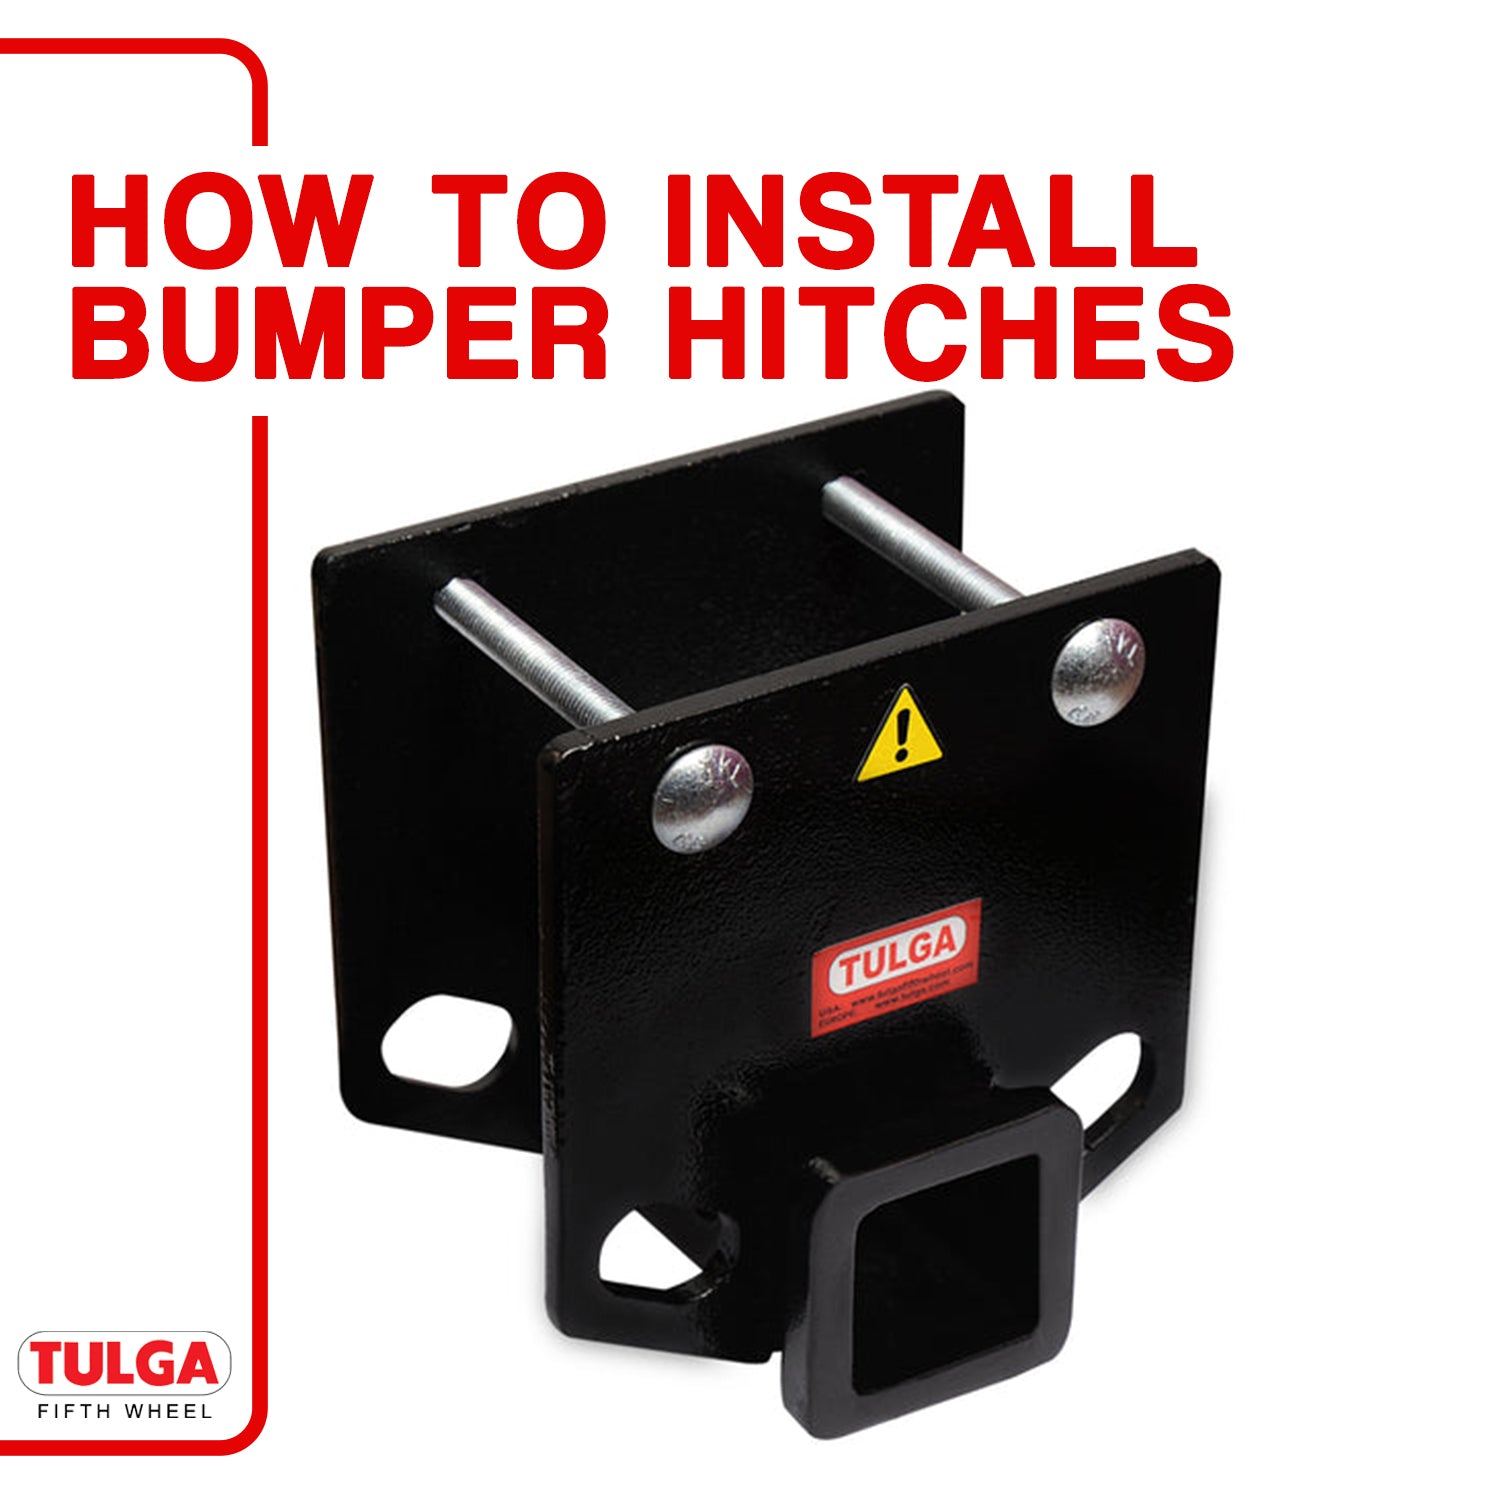 How to Install Bumper Hitches